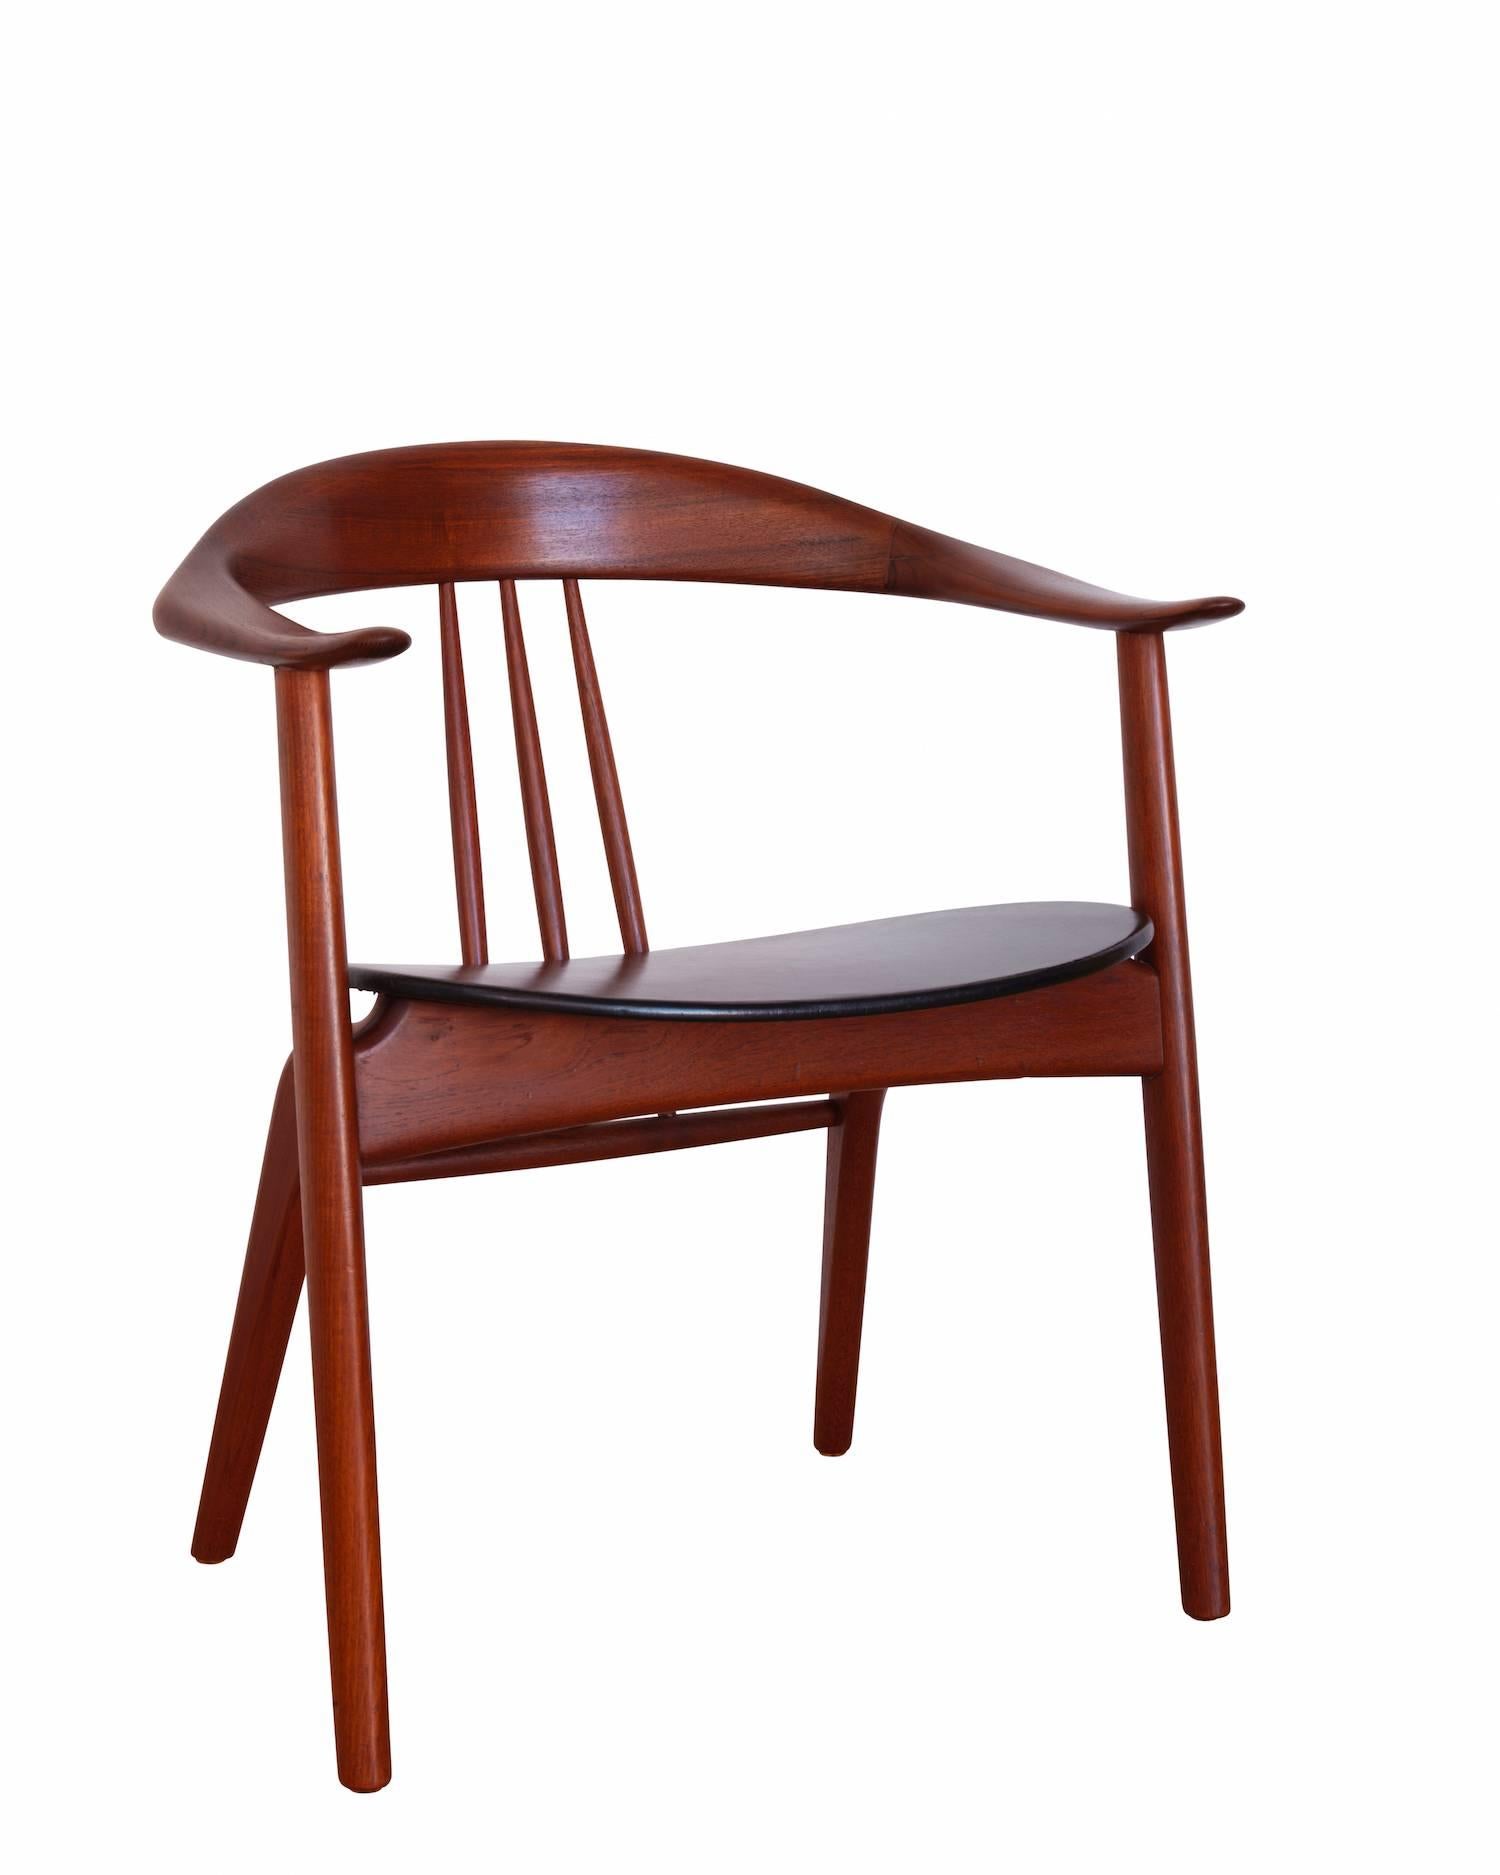 Teak armchair with black leather seat. 
Manufactured by Mogens Kold in the 1950s.